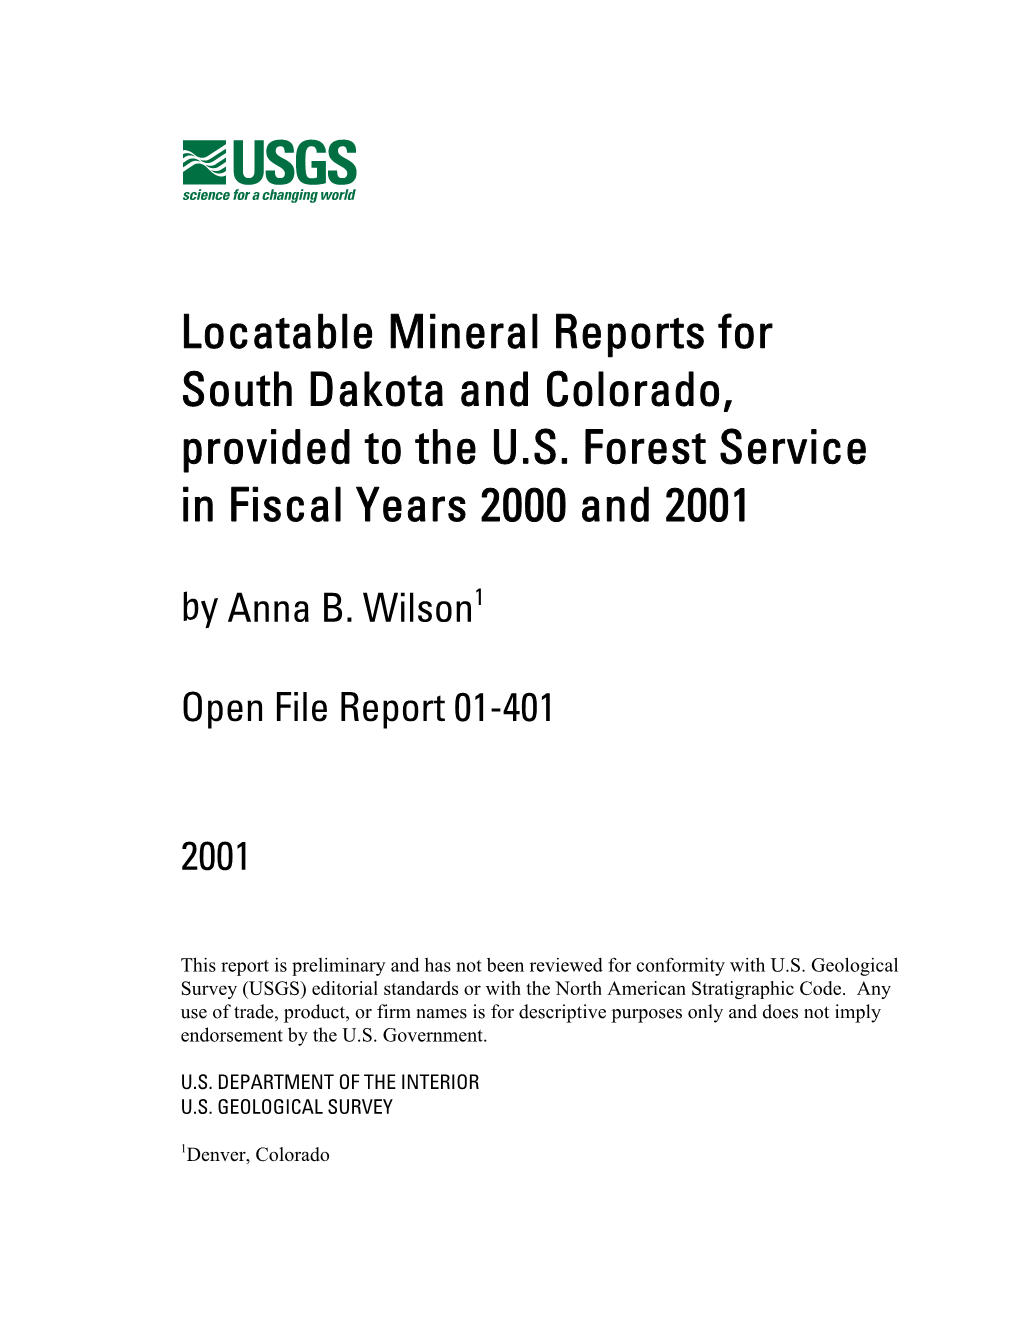 Locatable Mineral Reports for South Dakota and Colorado, Provided to the U.S